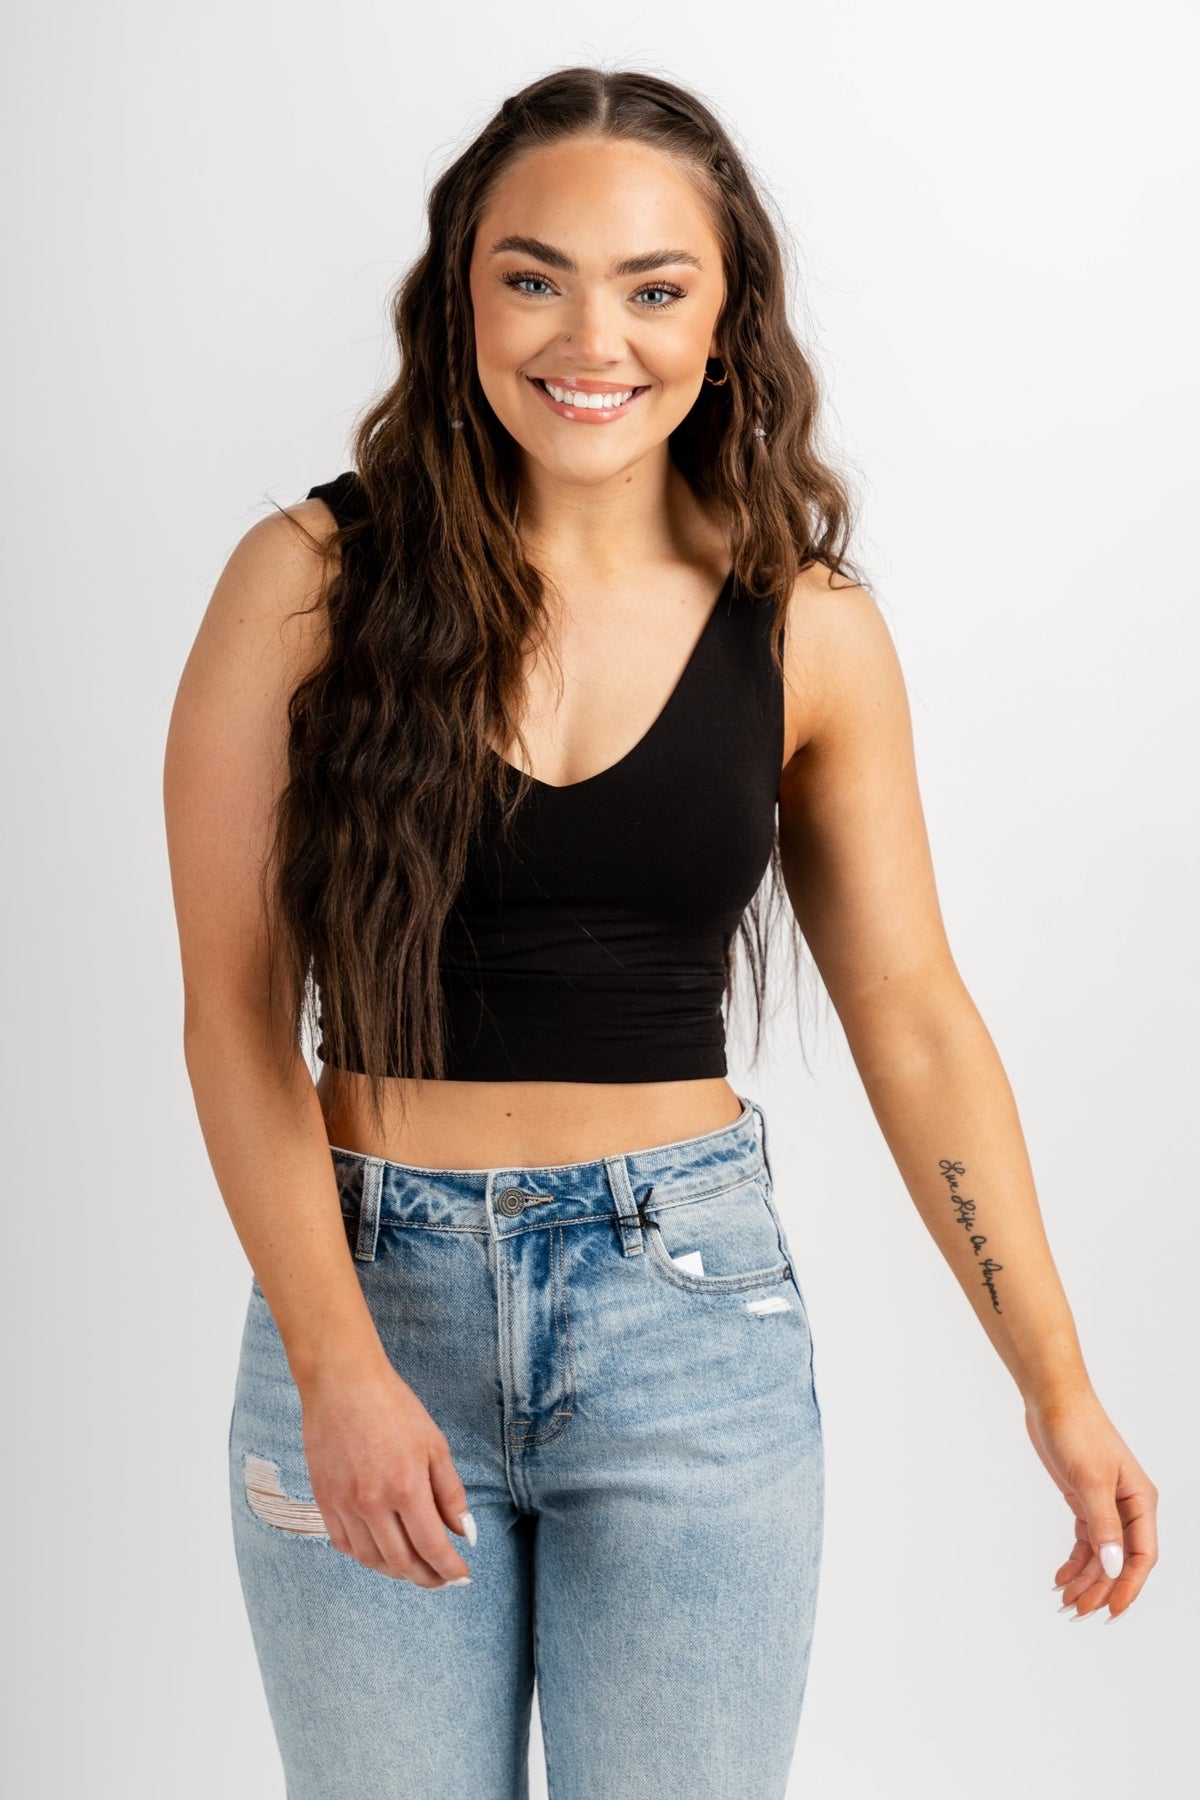 Modal jersey crop tank top black - Cute Top - Trendy Tank Tops at Lush Fashion Lounge Boutique in Oklahoma City